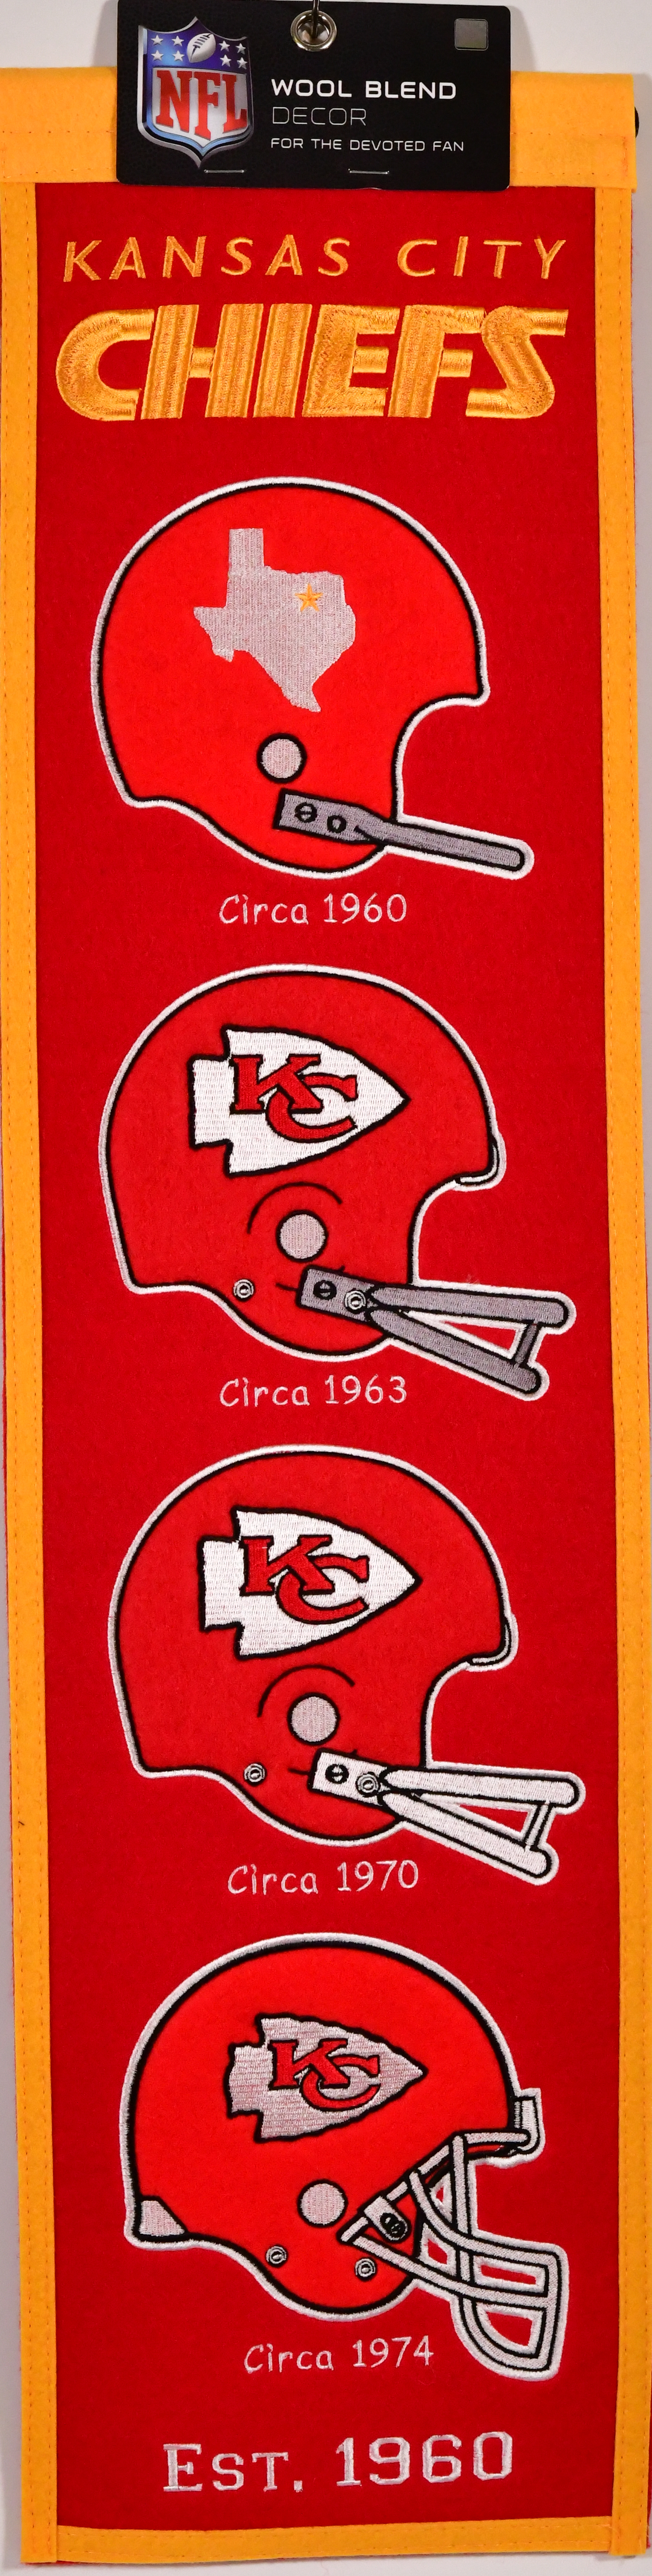 Kansas City Chiefs Heritage Banner – Sports Images & More LLC